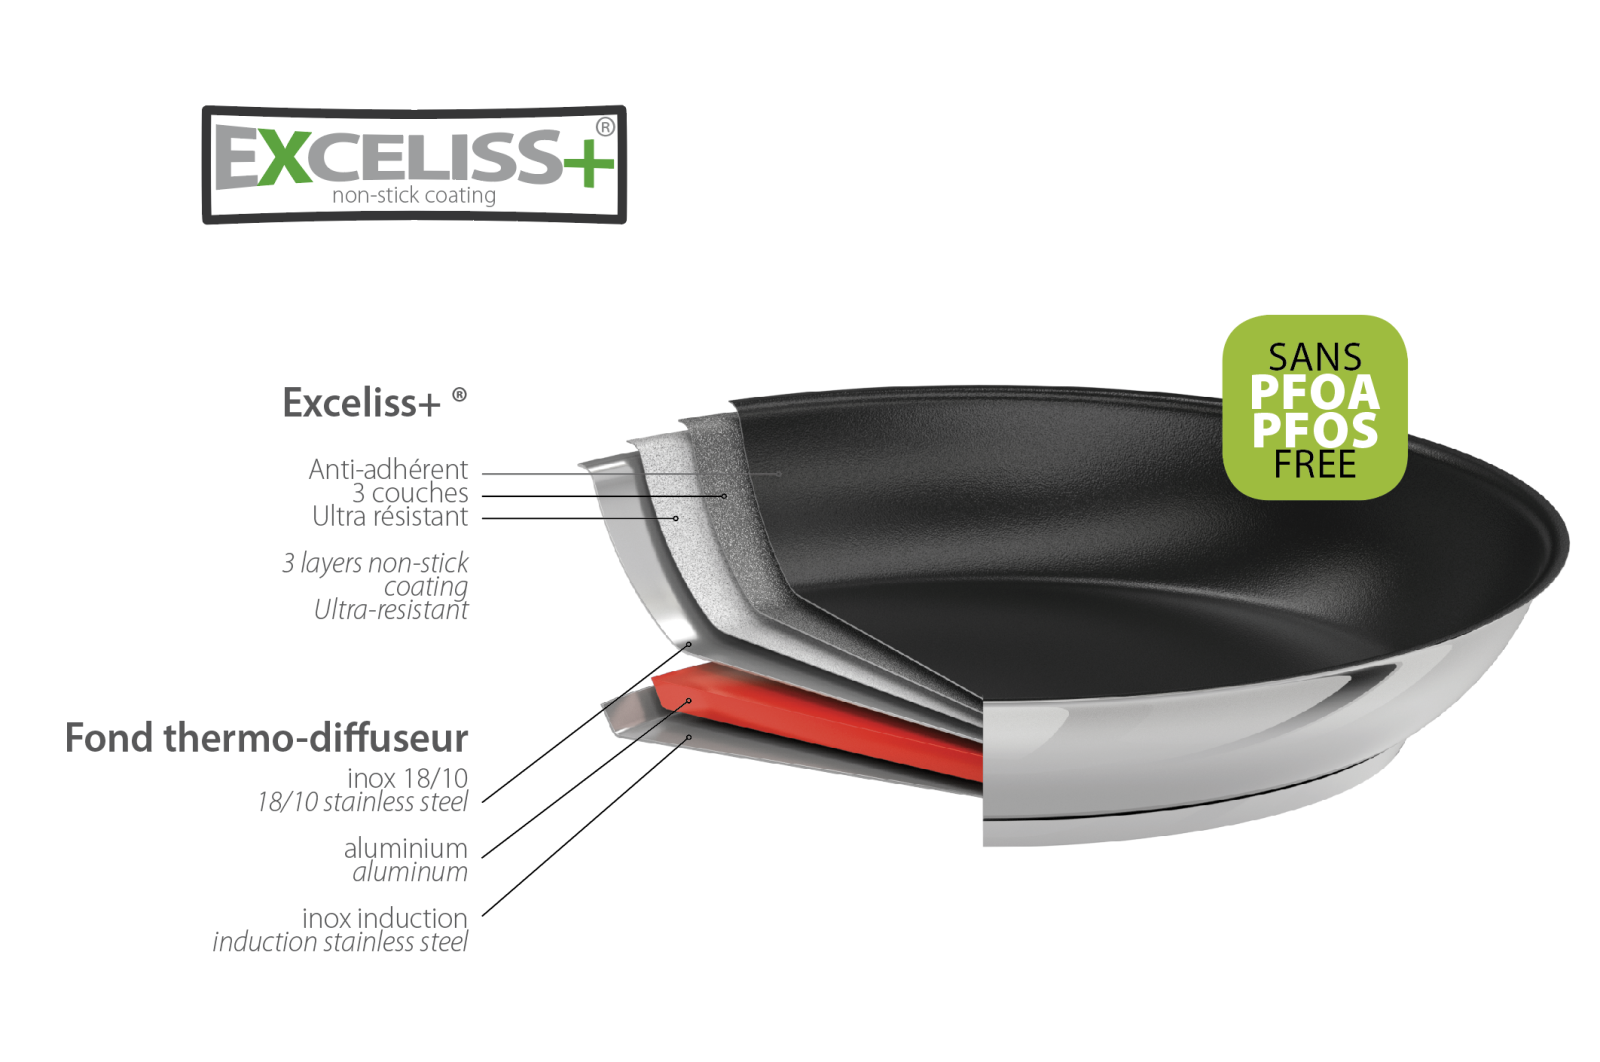 High Frying Pan Cristel  Stainless Steel Non-stick Exceliss+ Strate 28 cm